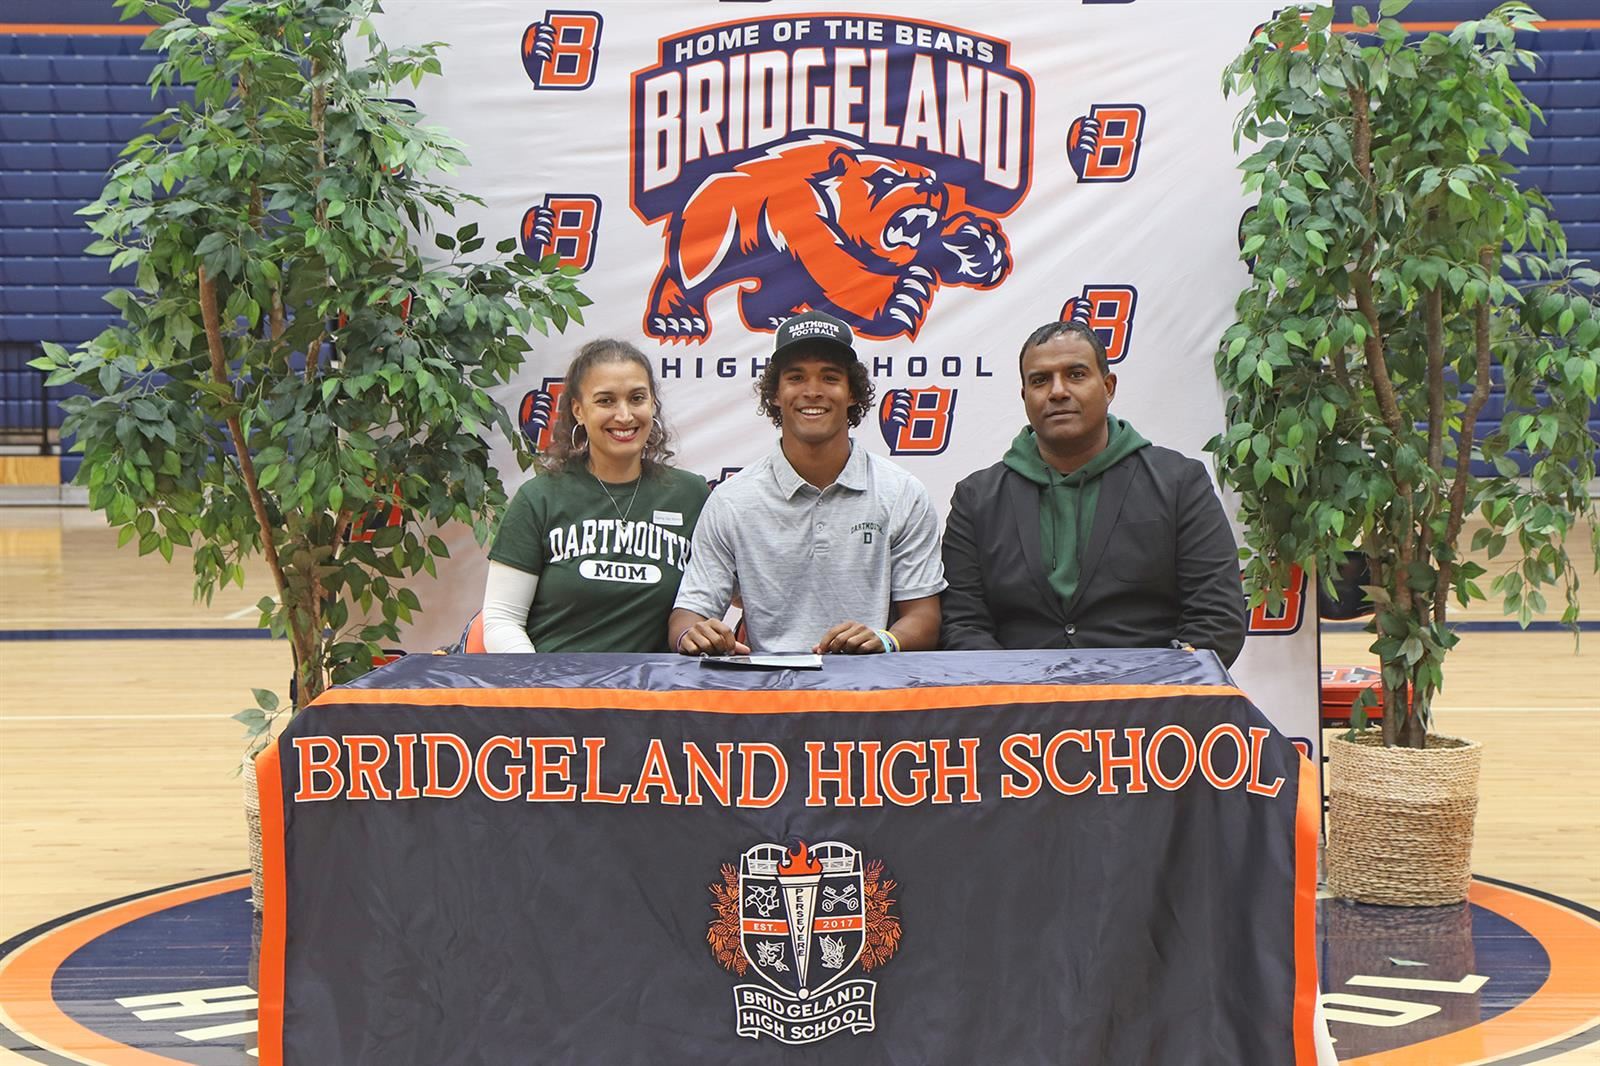 Bridgeland High School senior Jonathan Nelson, center, signed a letter of intent to play football at Dartmouth College.